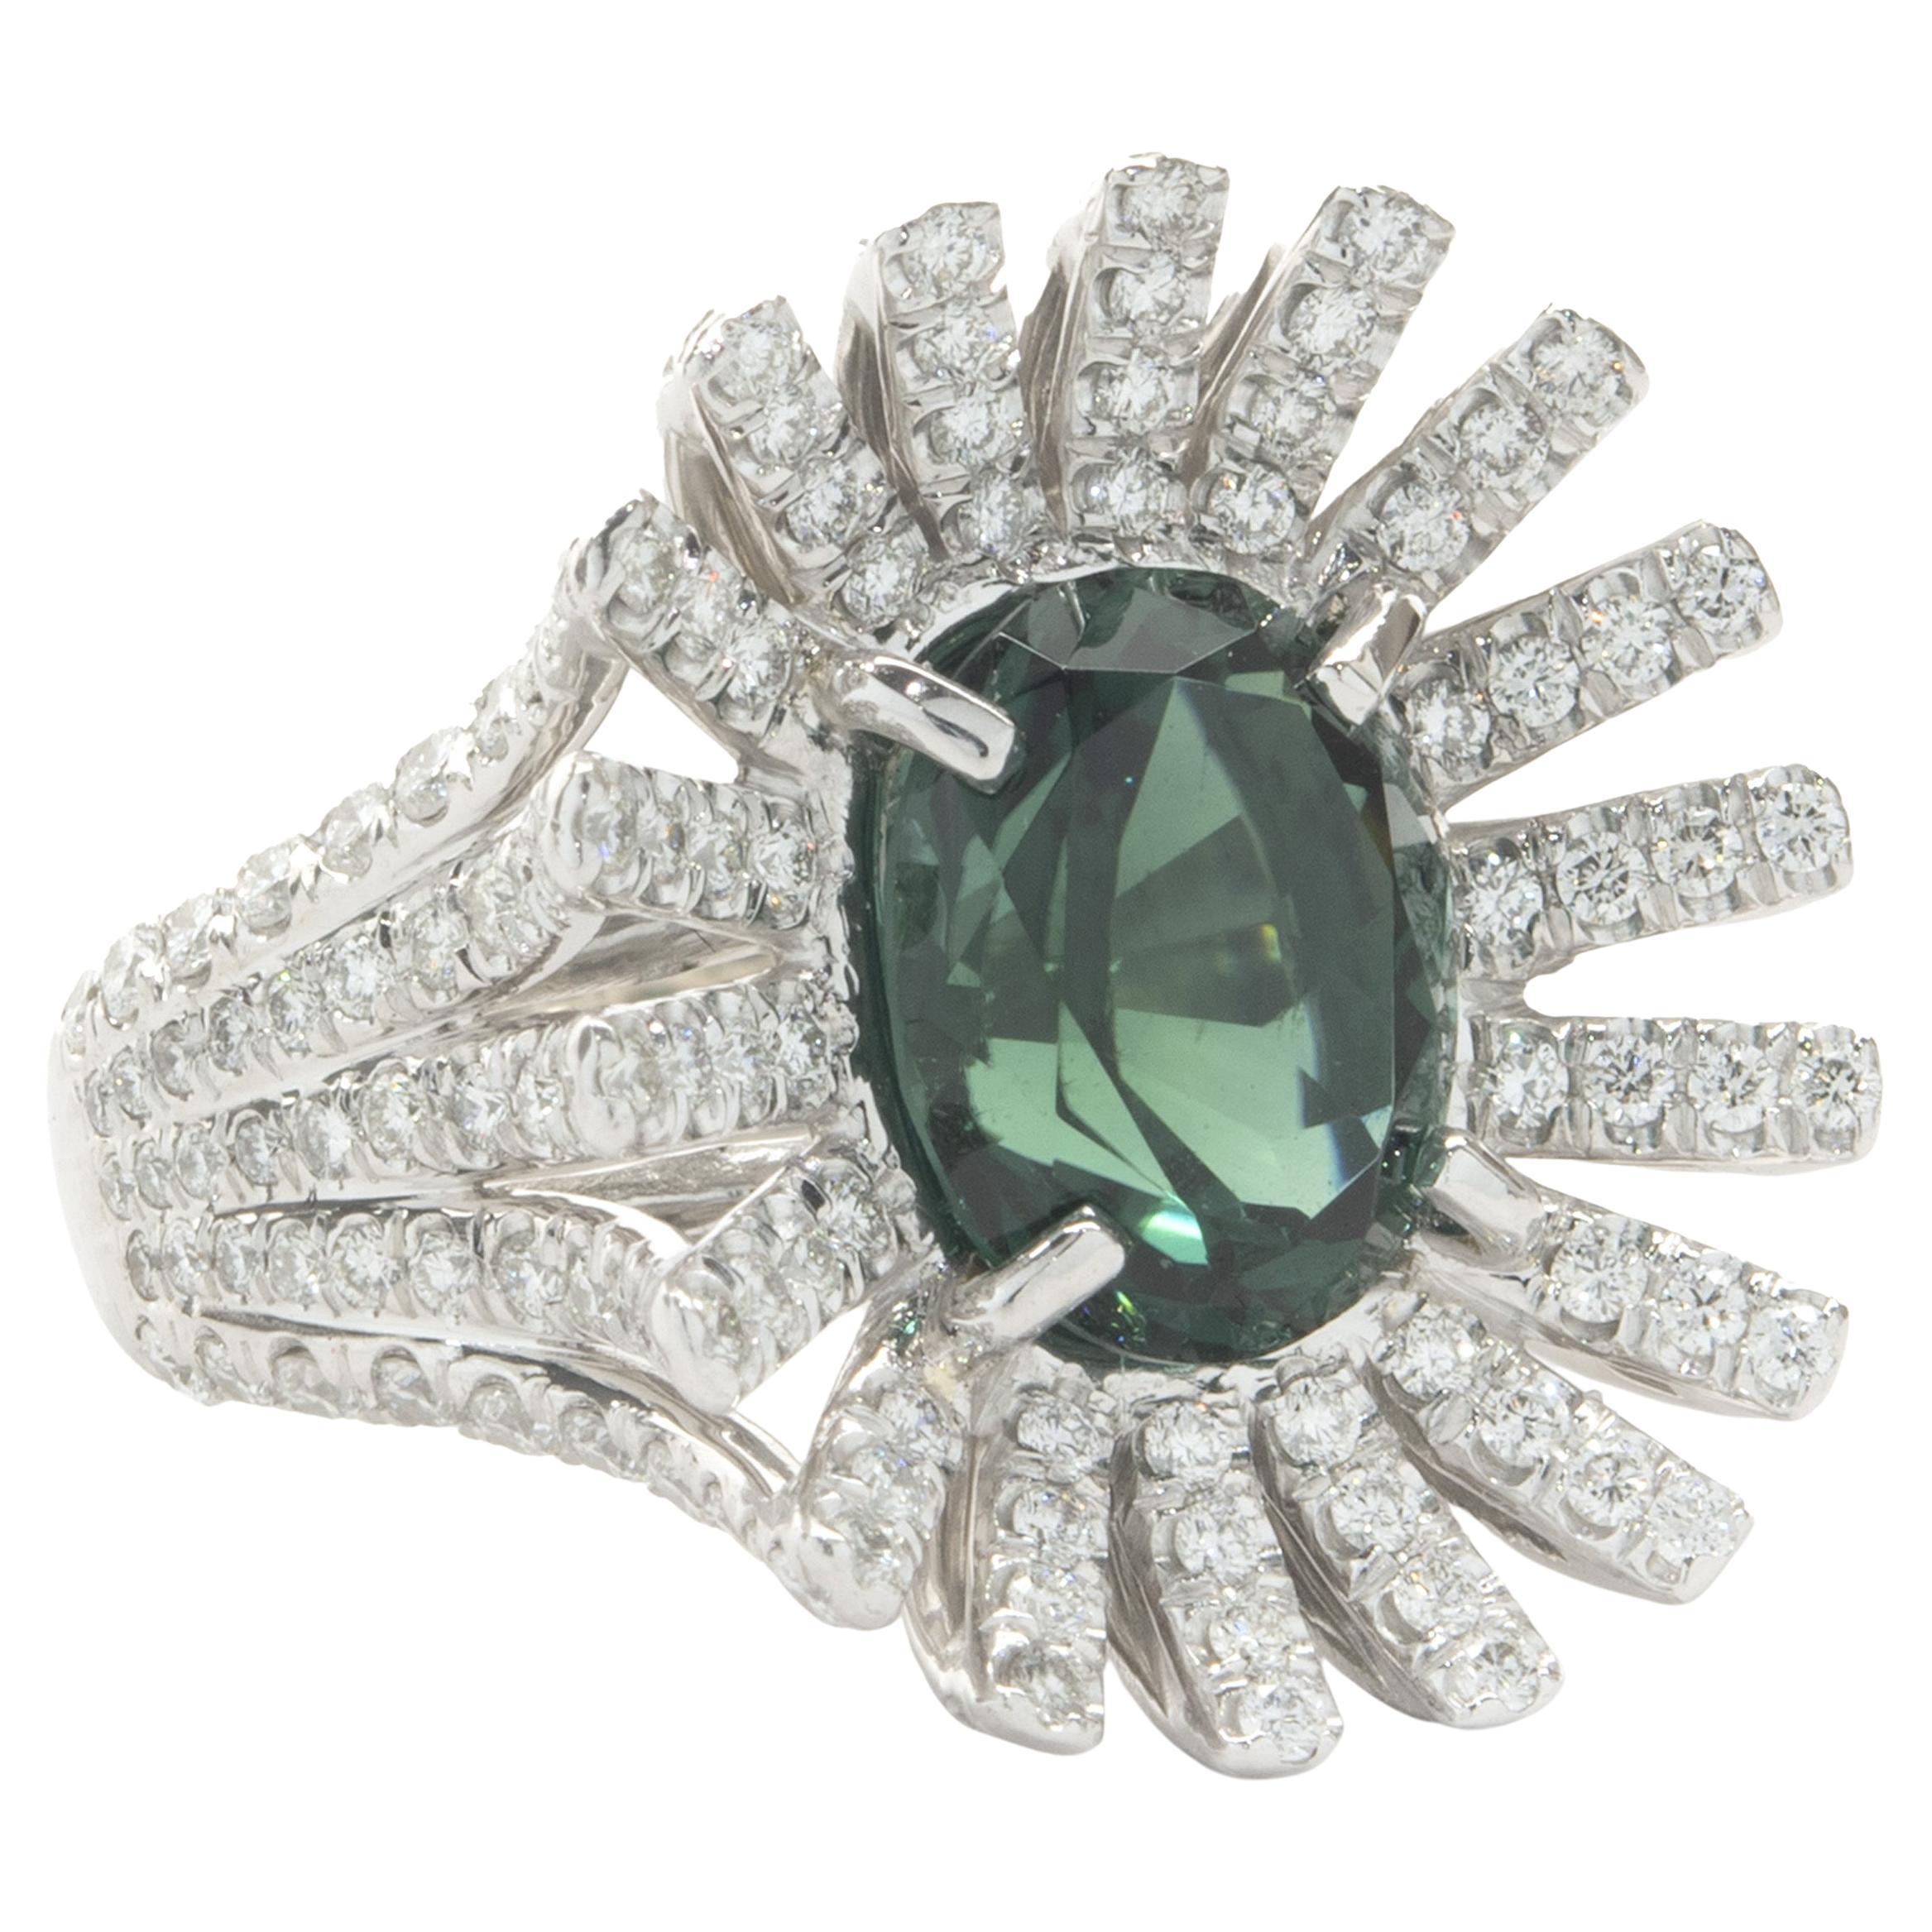 Designer: custom
Material: Platinum
Diamond: 154 round brilliant cut = 1.50cttw
Color: G
Clarity: VS2
Green Tourmaline: 1 oval cut = 2.93ct
Dimensions: ring top measures 20.80mm long
Ring Size: 5.5 (complimentary sizing available)
Weight: 15.20